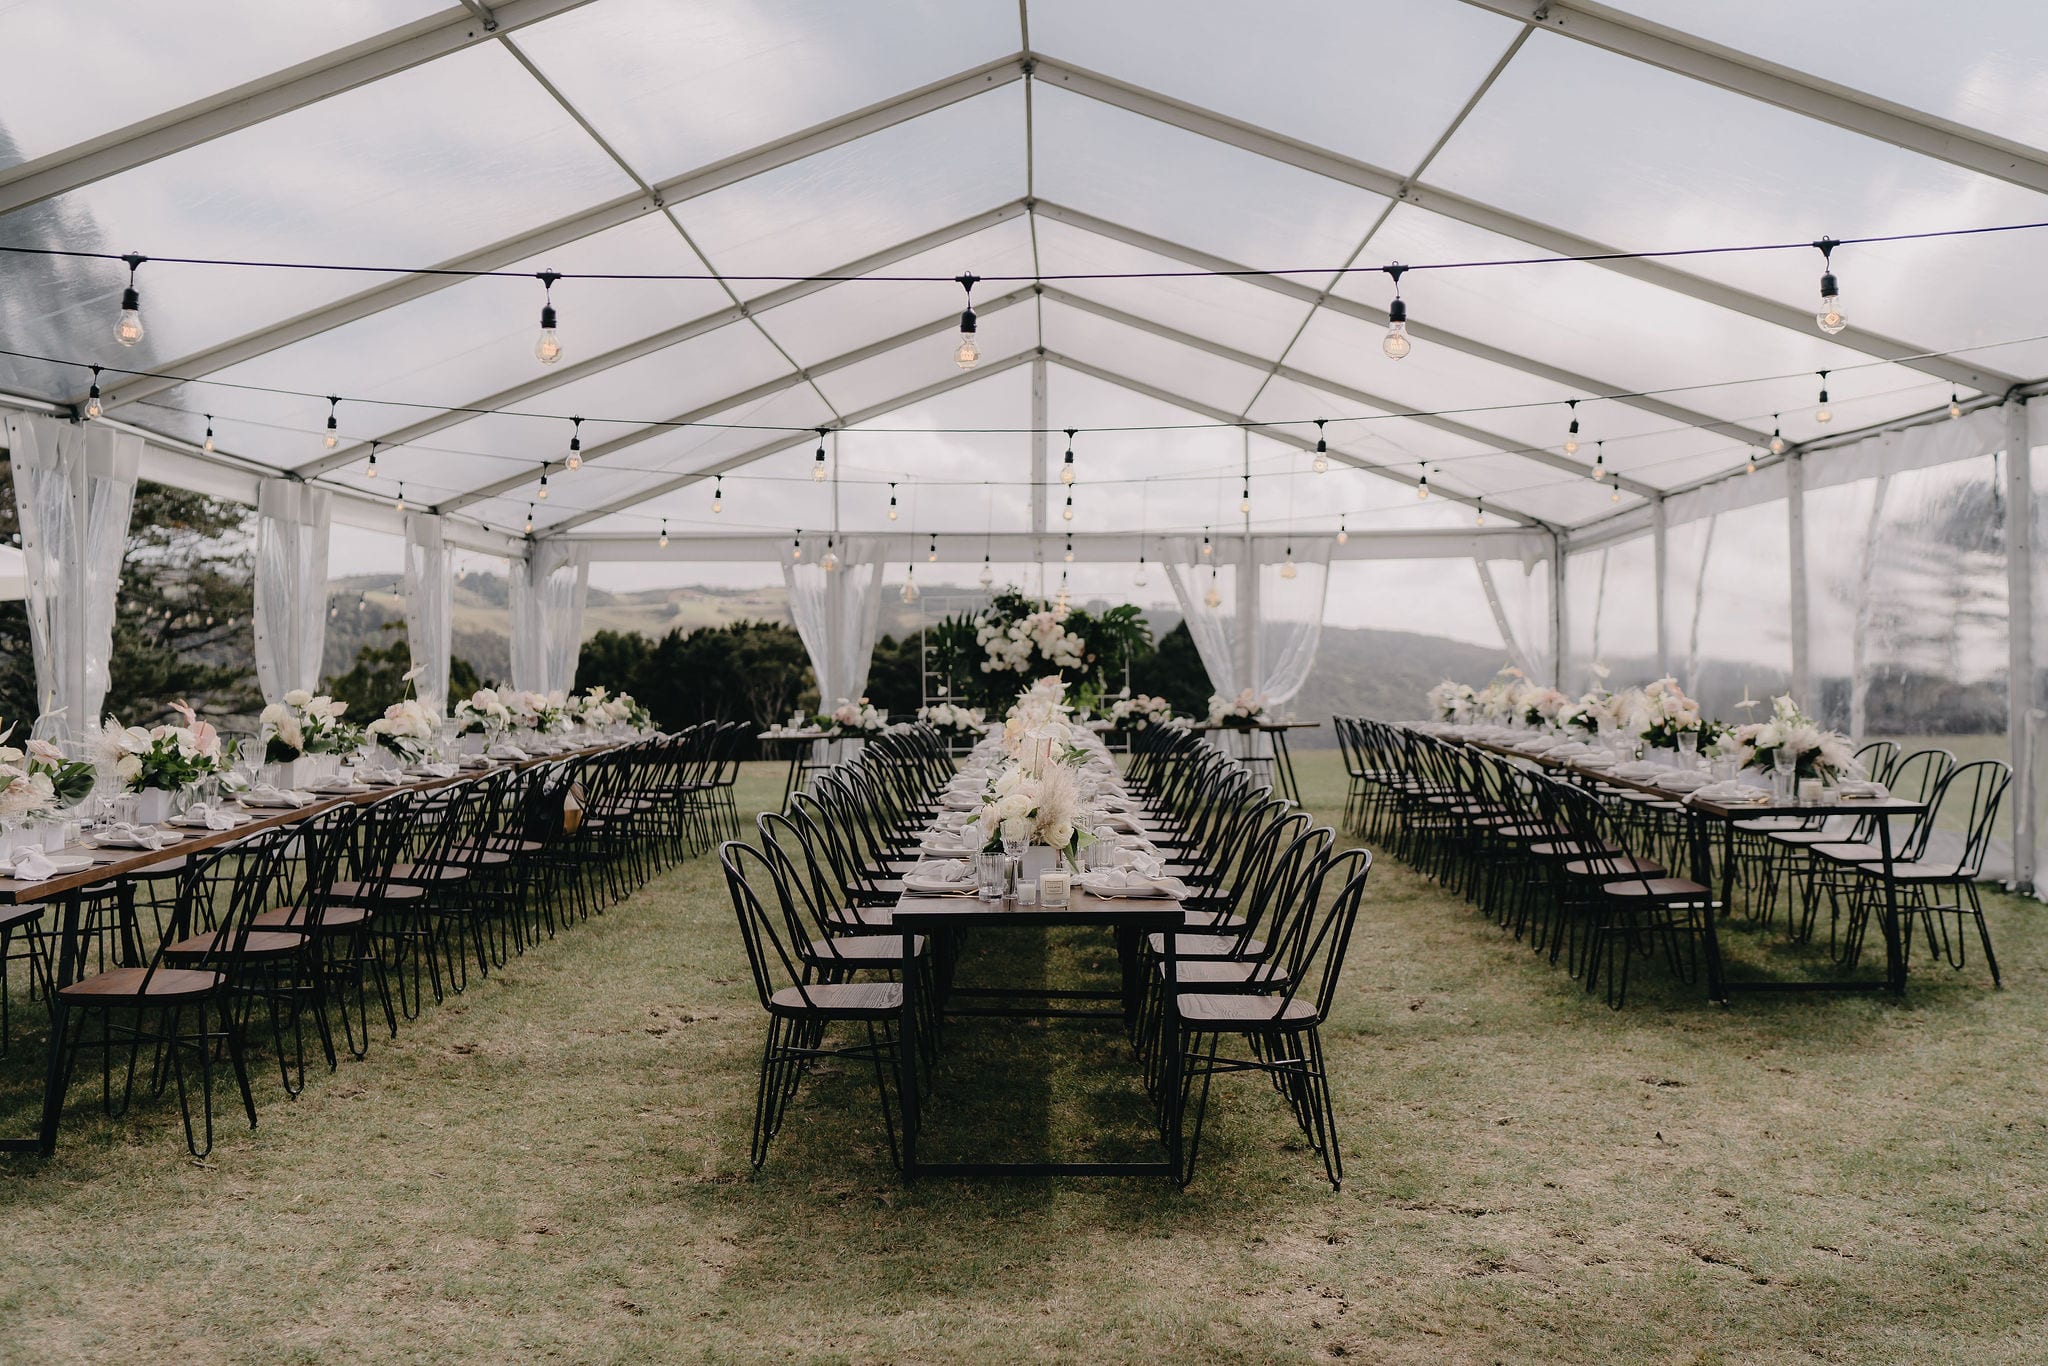 twelve-tables-hire-clear-marquee-wedding-farm-furniture-hire-11